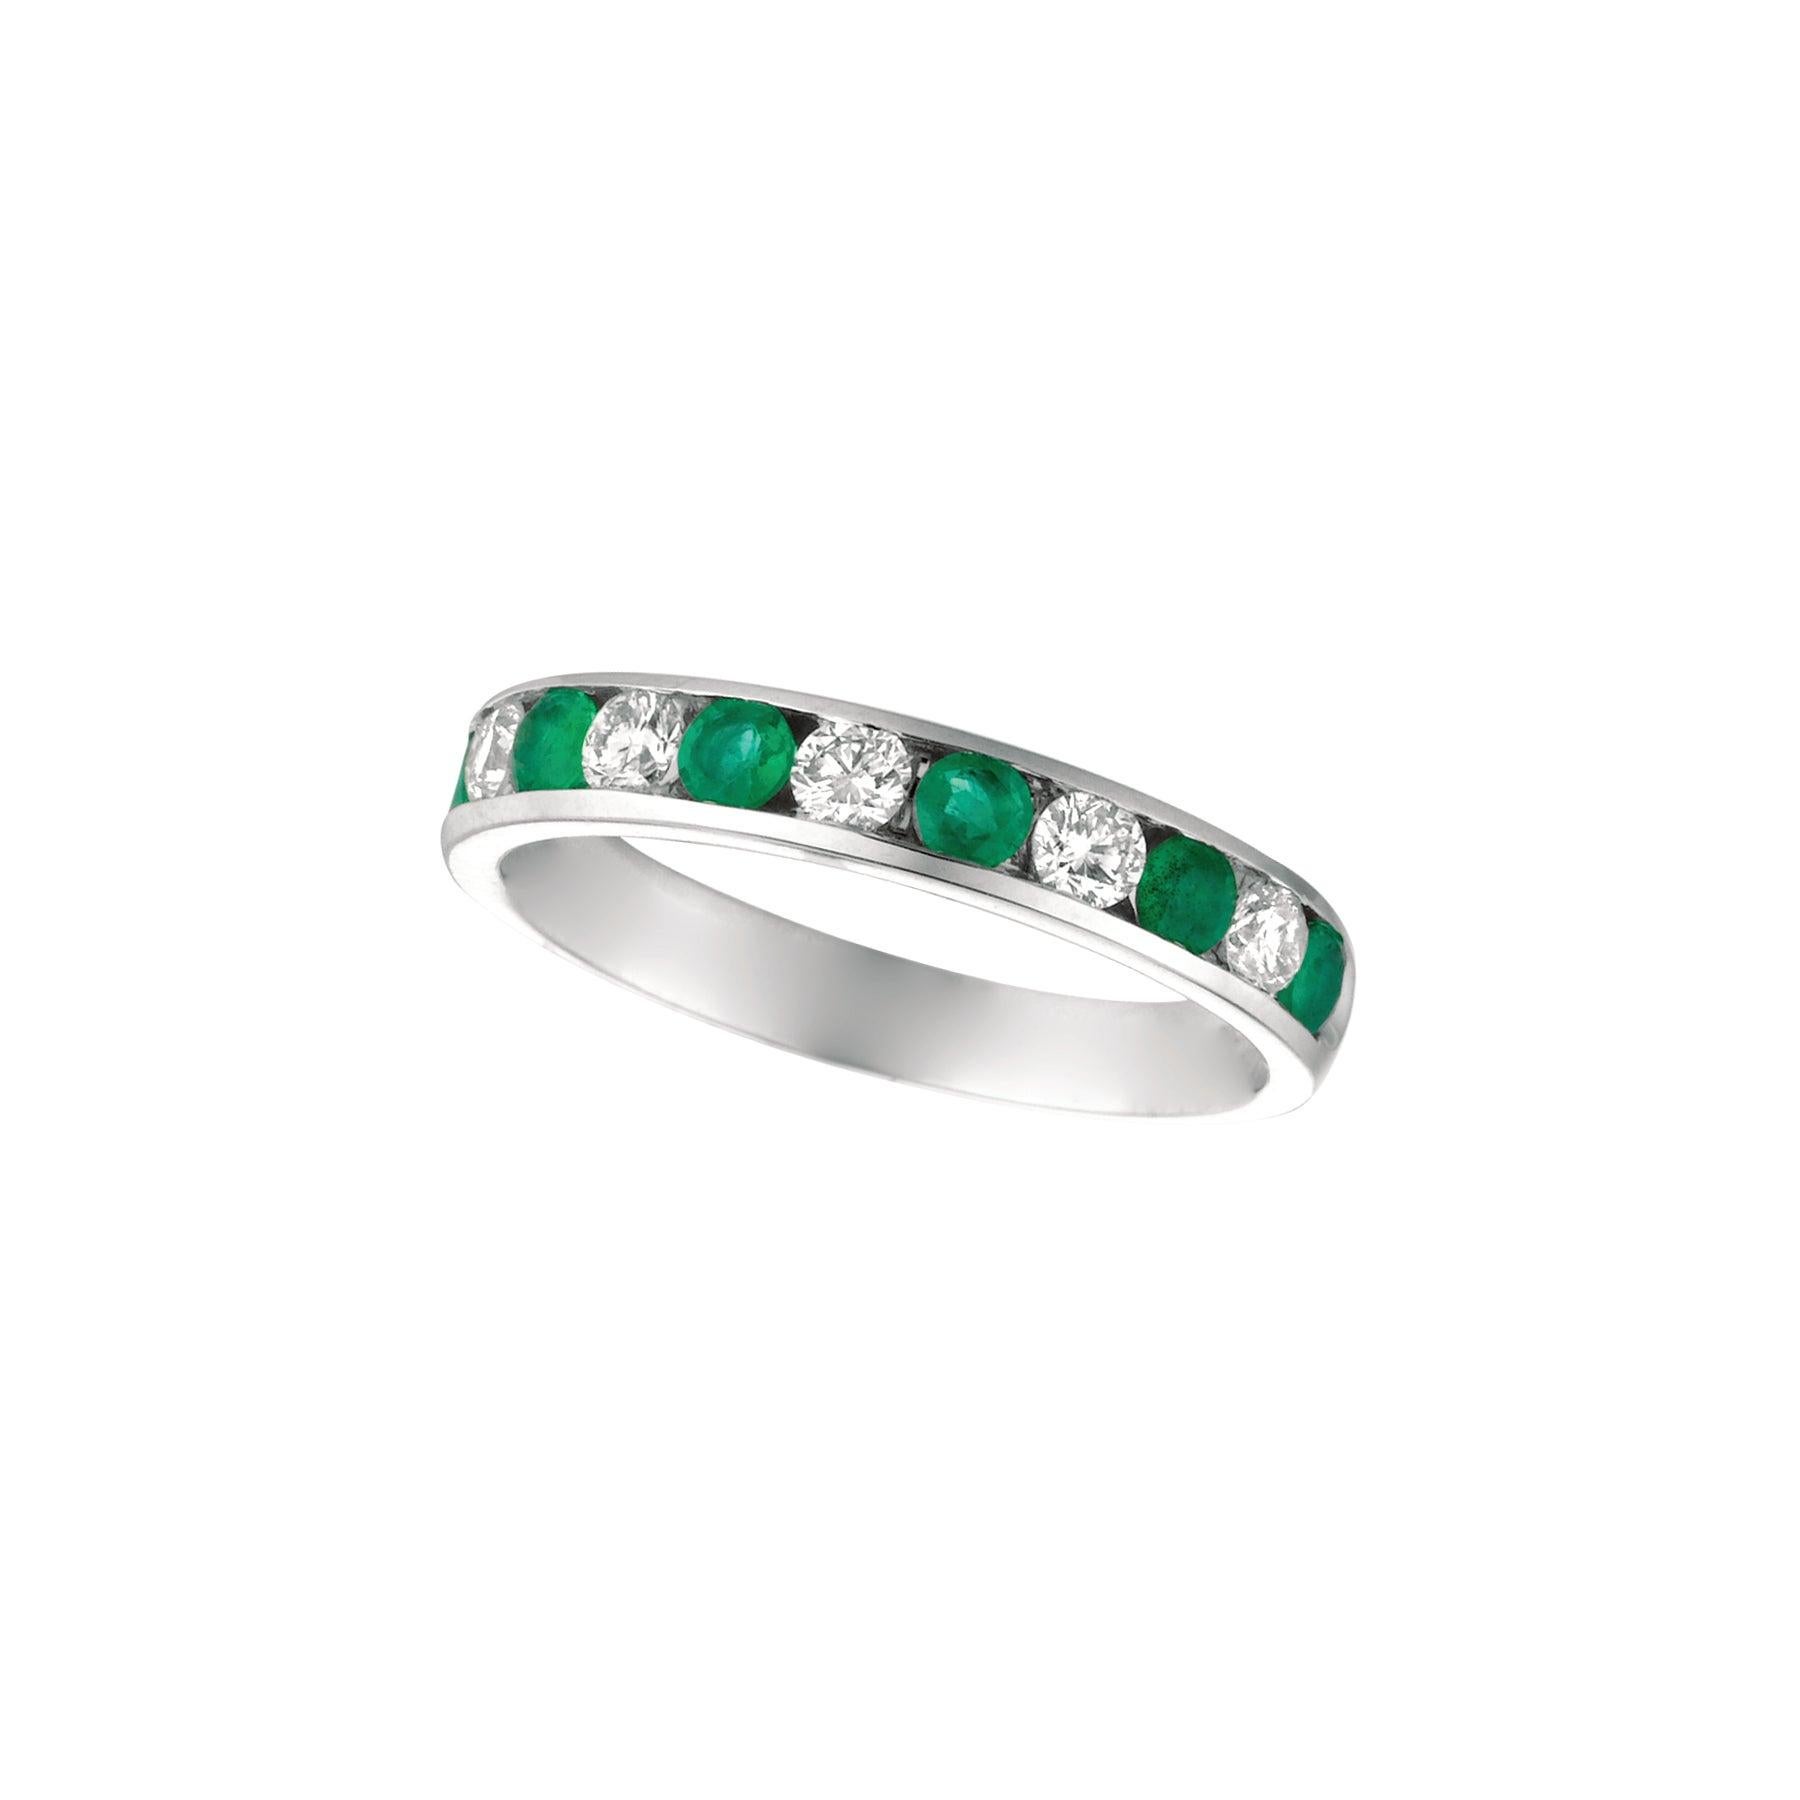 For Sale:  0.80 Carat Natural Emerald and Diamond Ring 14 Karat White Gold 3